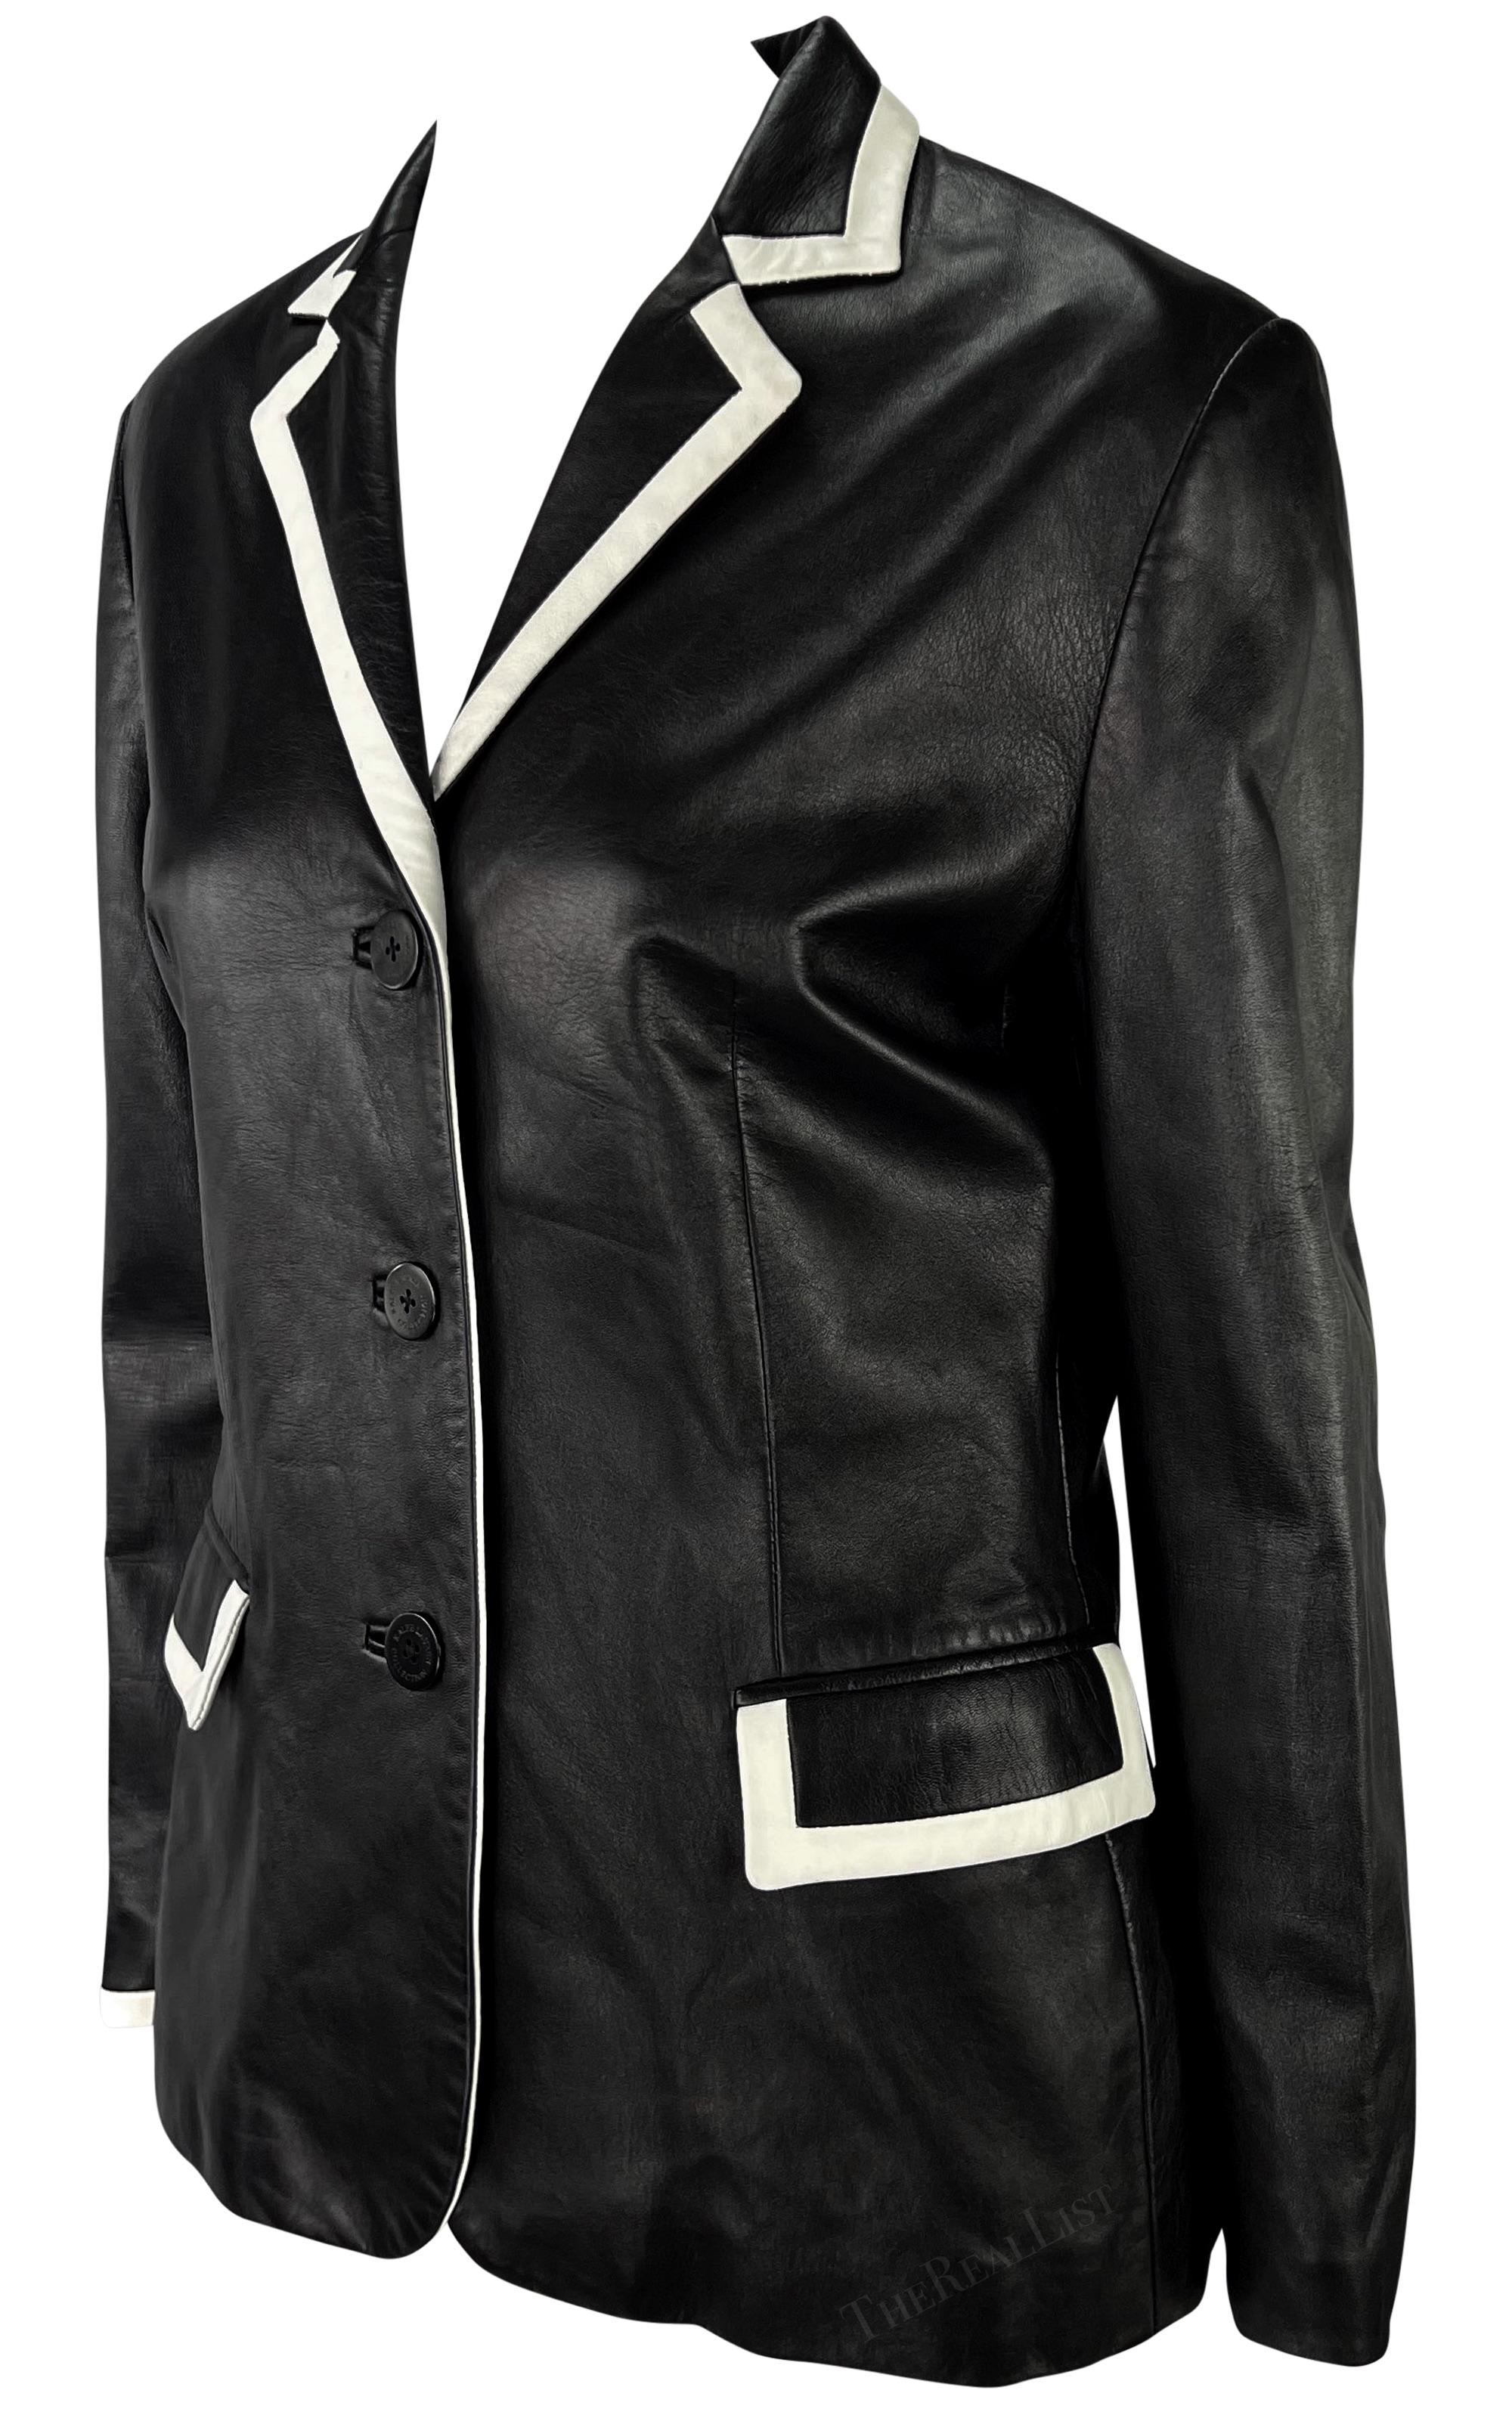 S/S 2001 Ralph Lauren Runway Black Leather White Trim Blazer Jacket In Excellent Condition For Sale In West Hollywood, CA